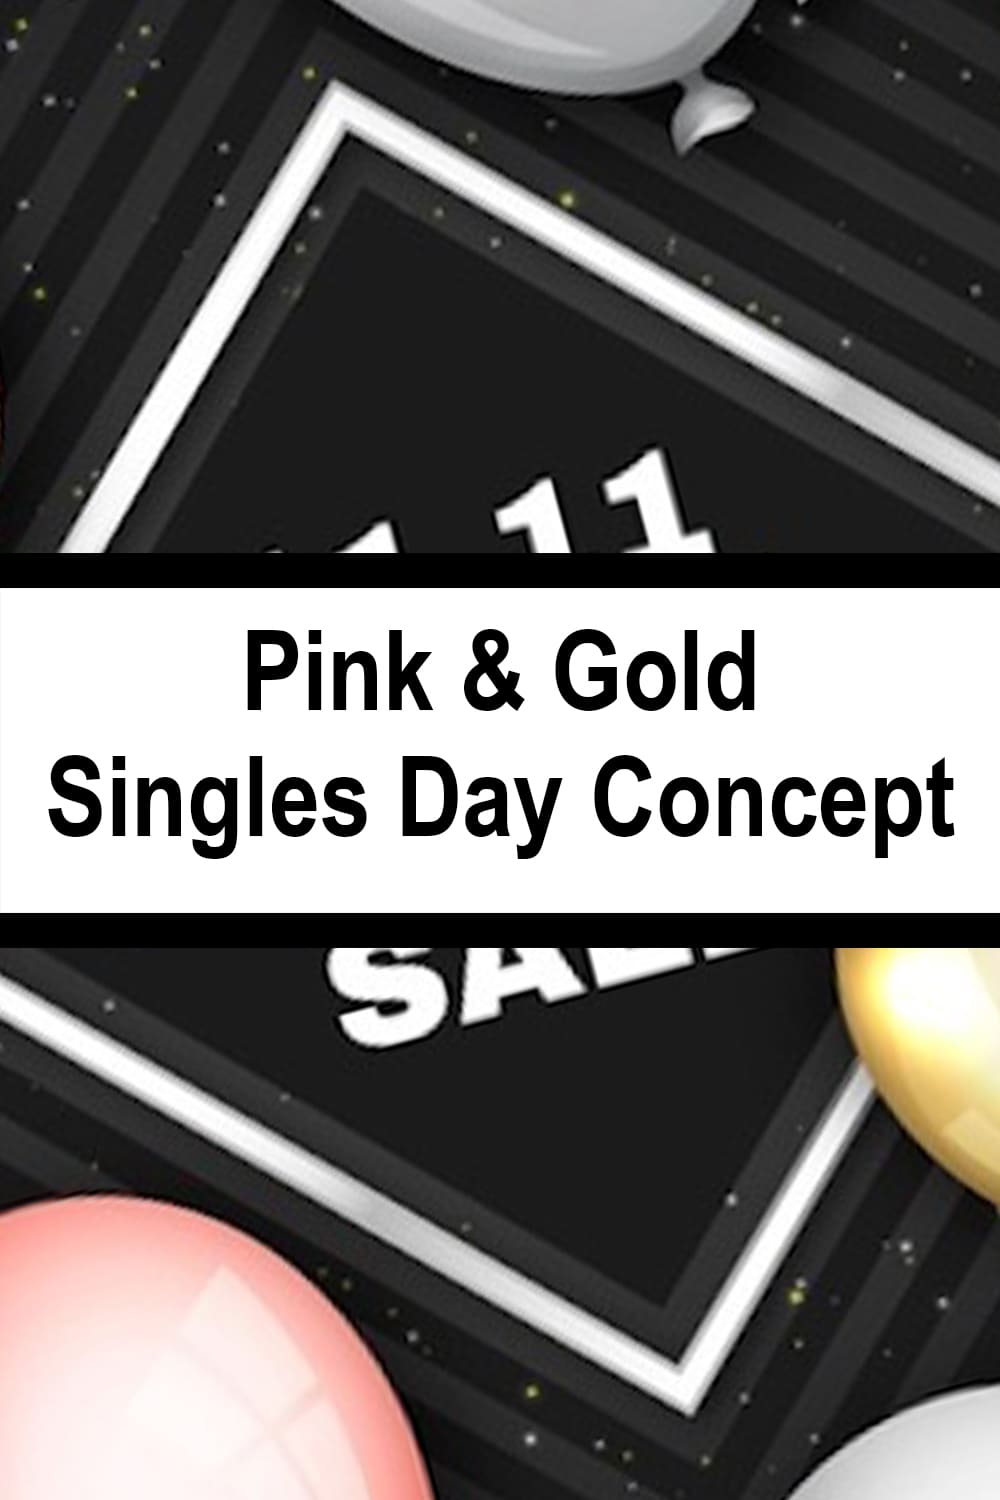 Pink and Gold Singles Day Concept Free Vector.